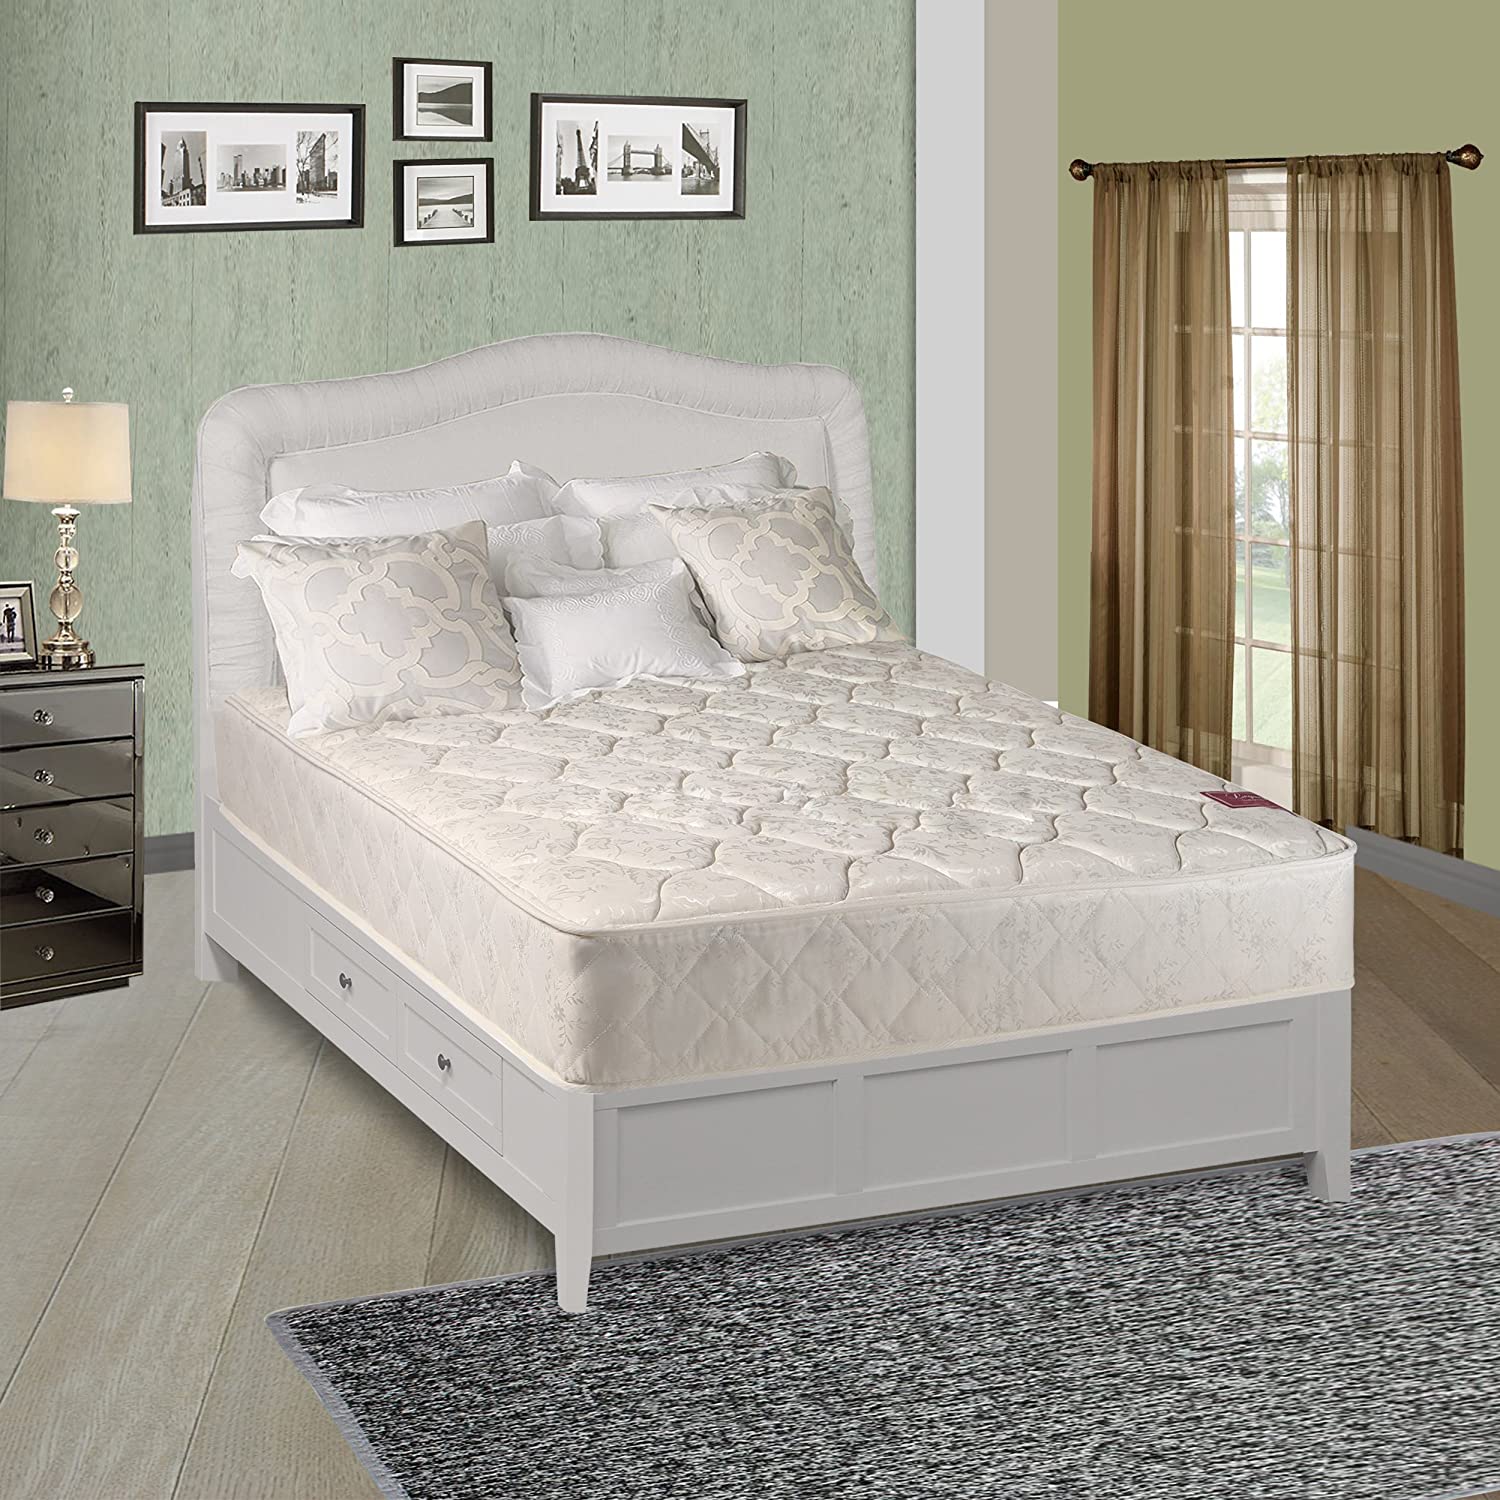 The bed frame or base under the mattress will have to be robust enough to hold the orthopedic mattress weight. 